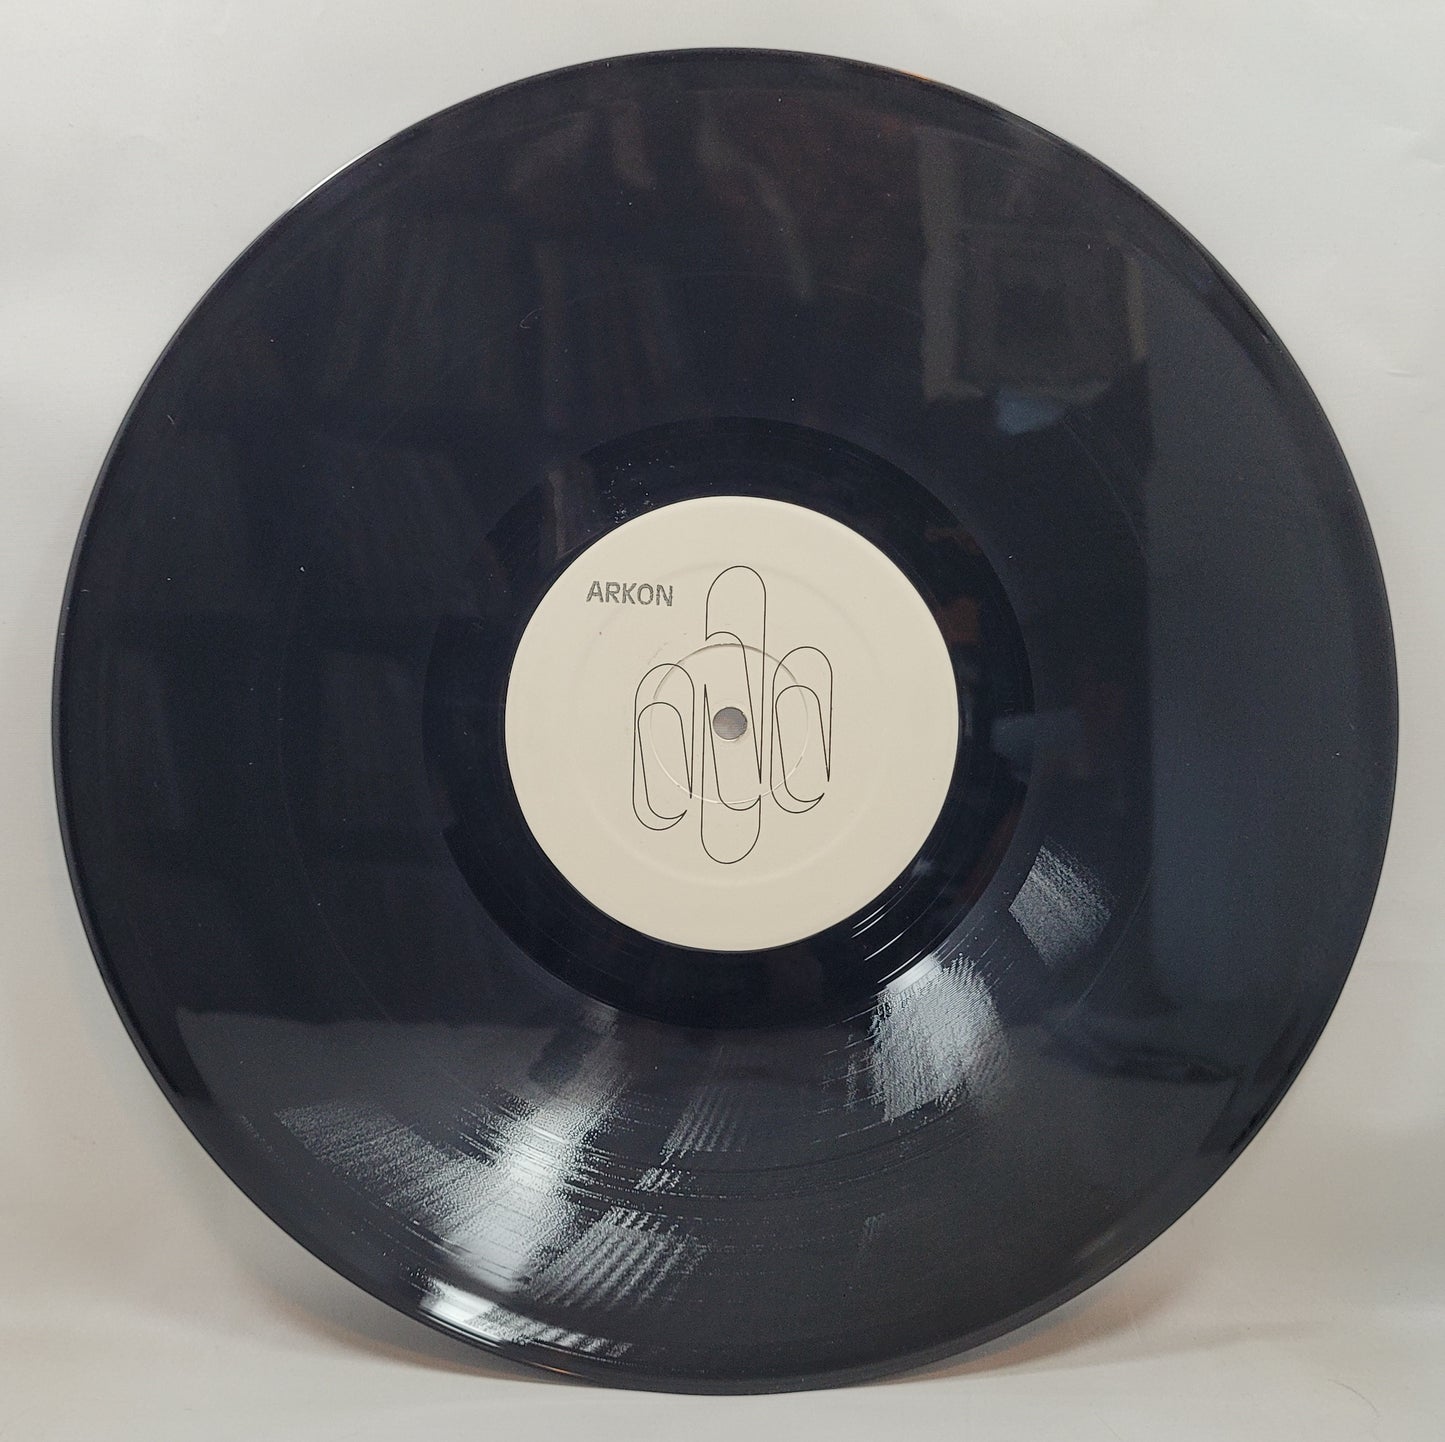 Robbers of Antiquity - Frequency Puzzle [Vinyl Record 12" Single]